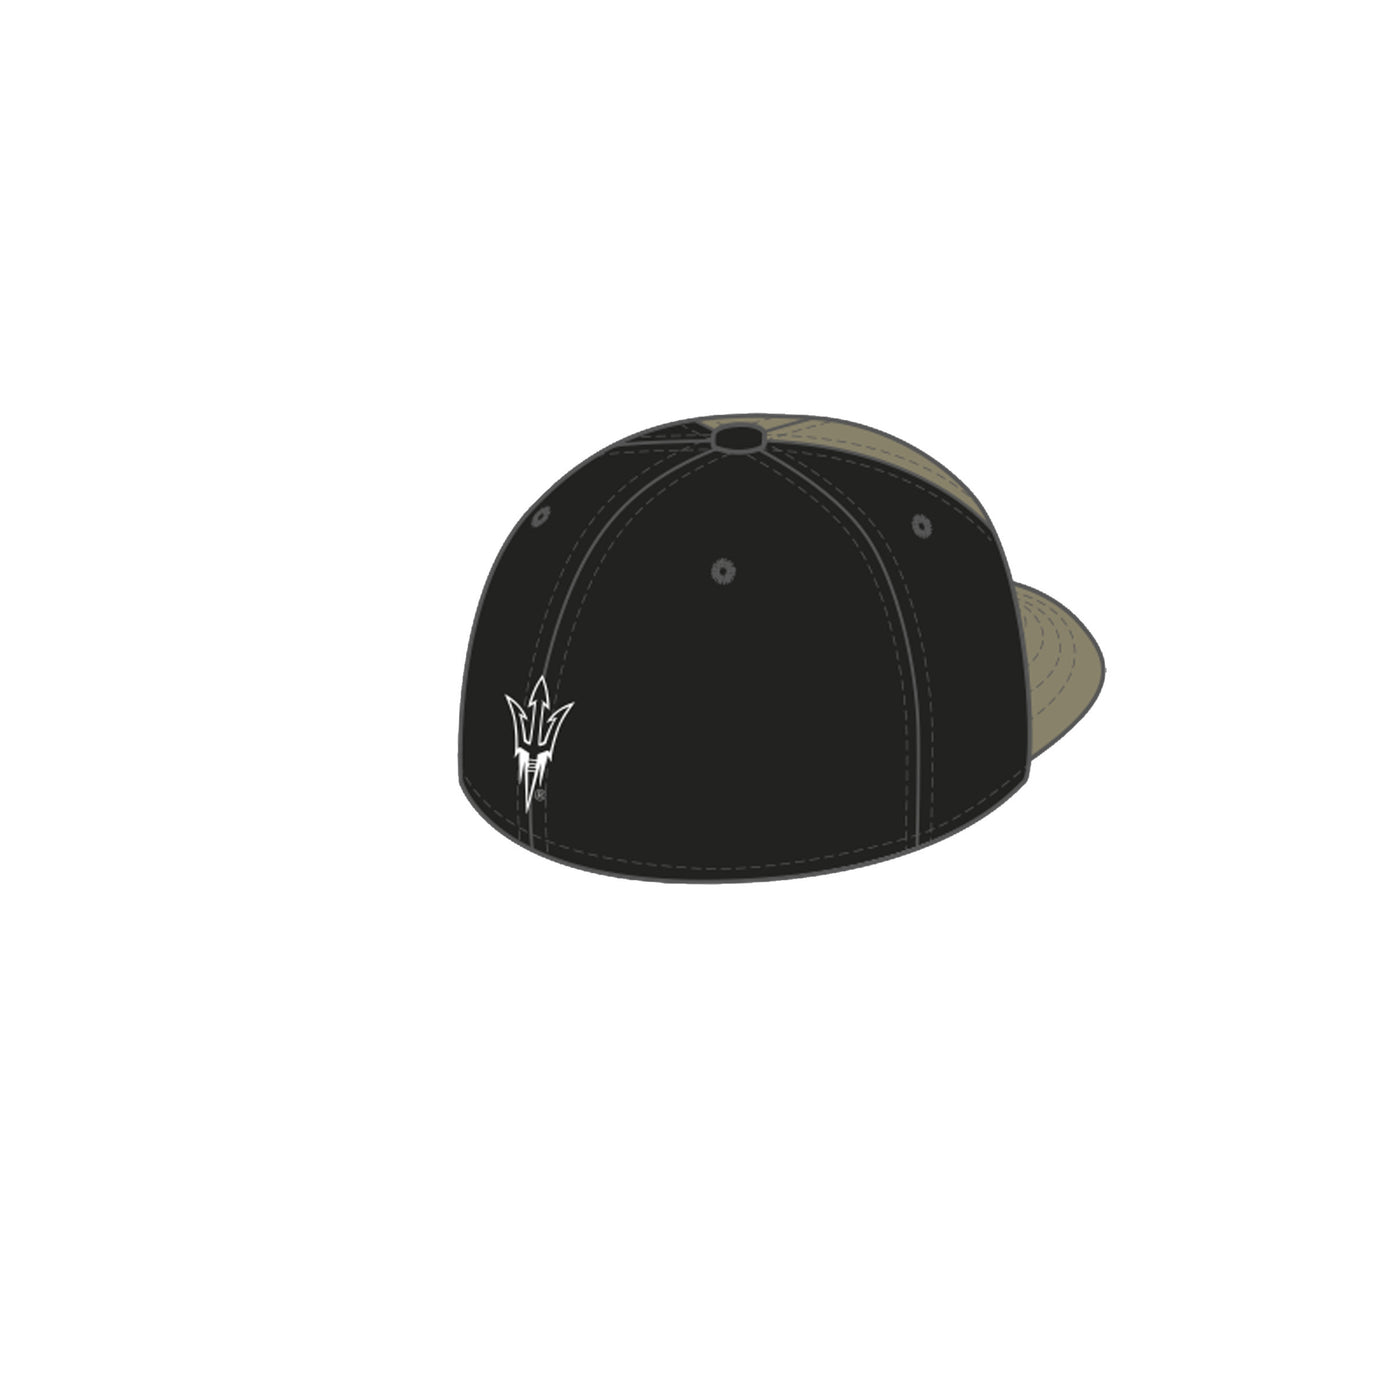 ASU stretch fit hat with black back and a white outlined pitchfork on the back